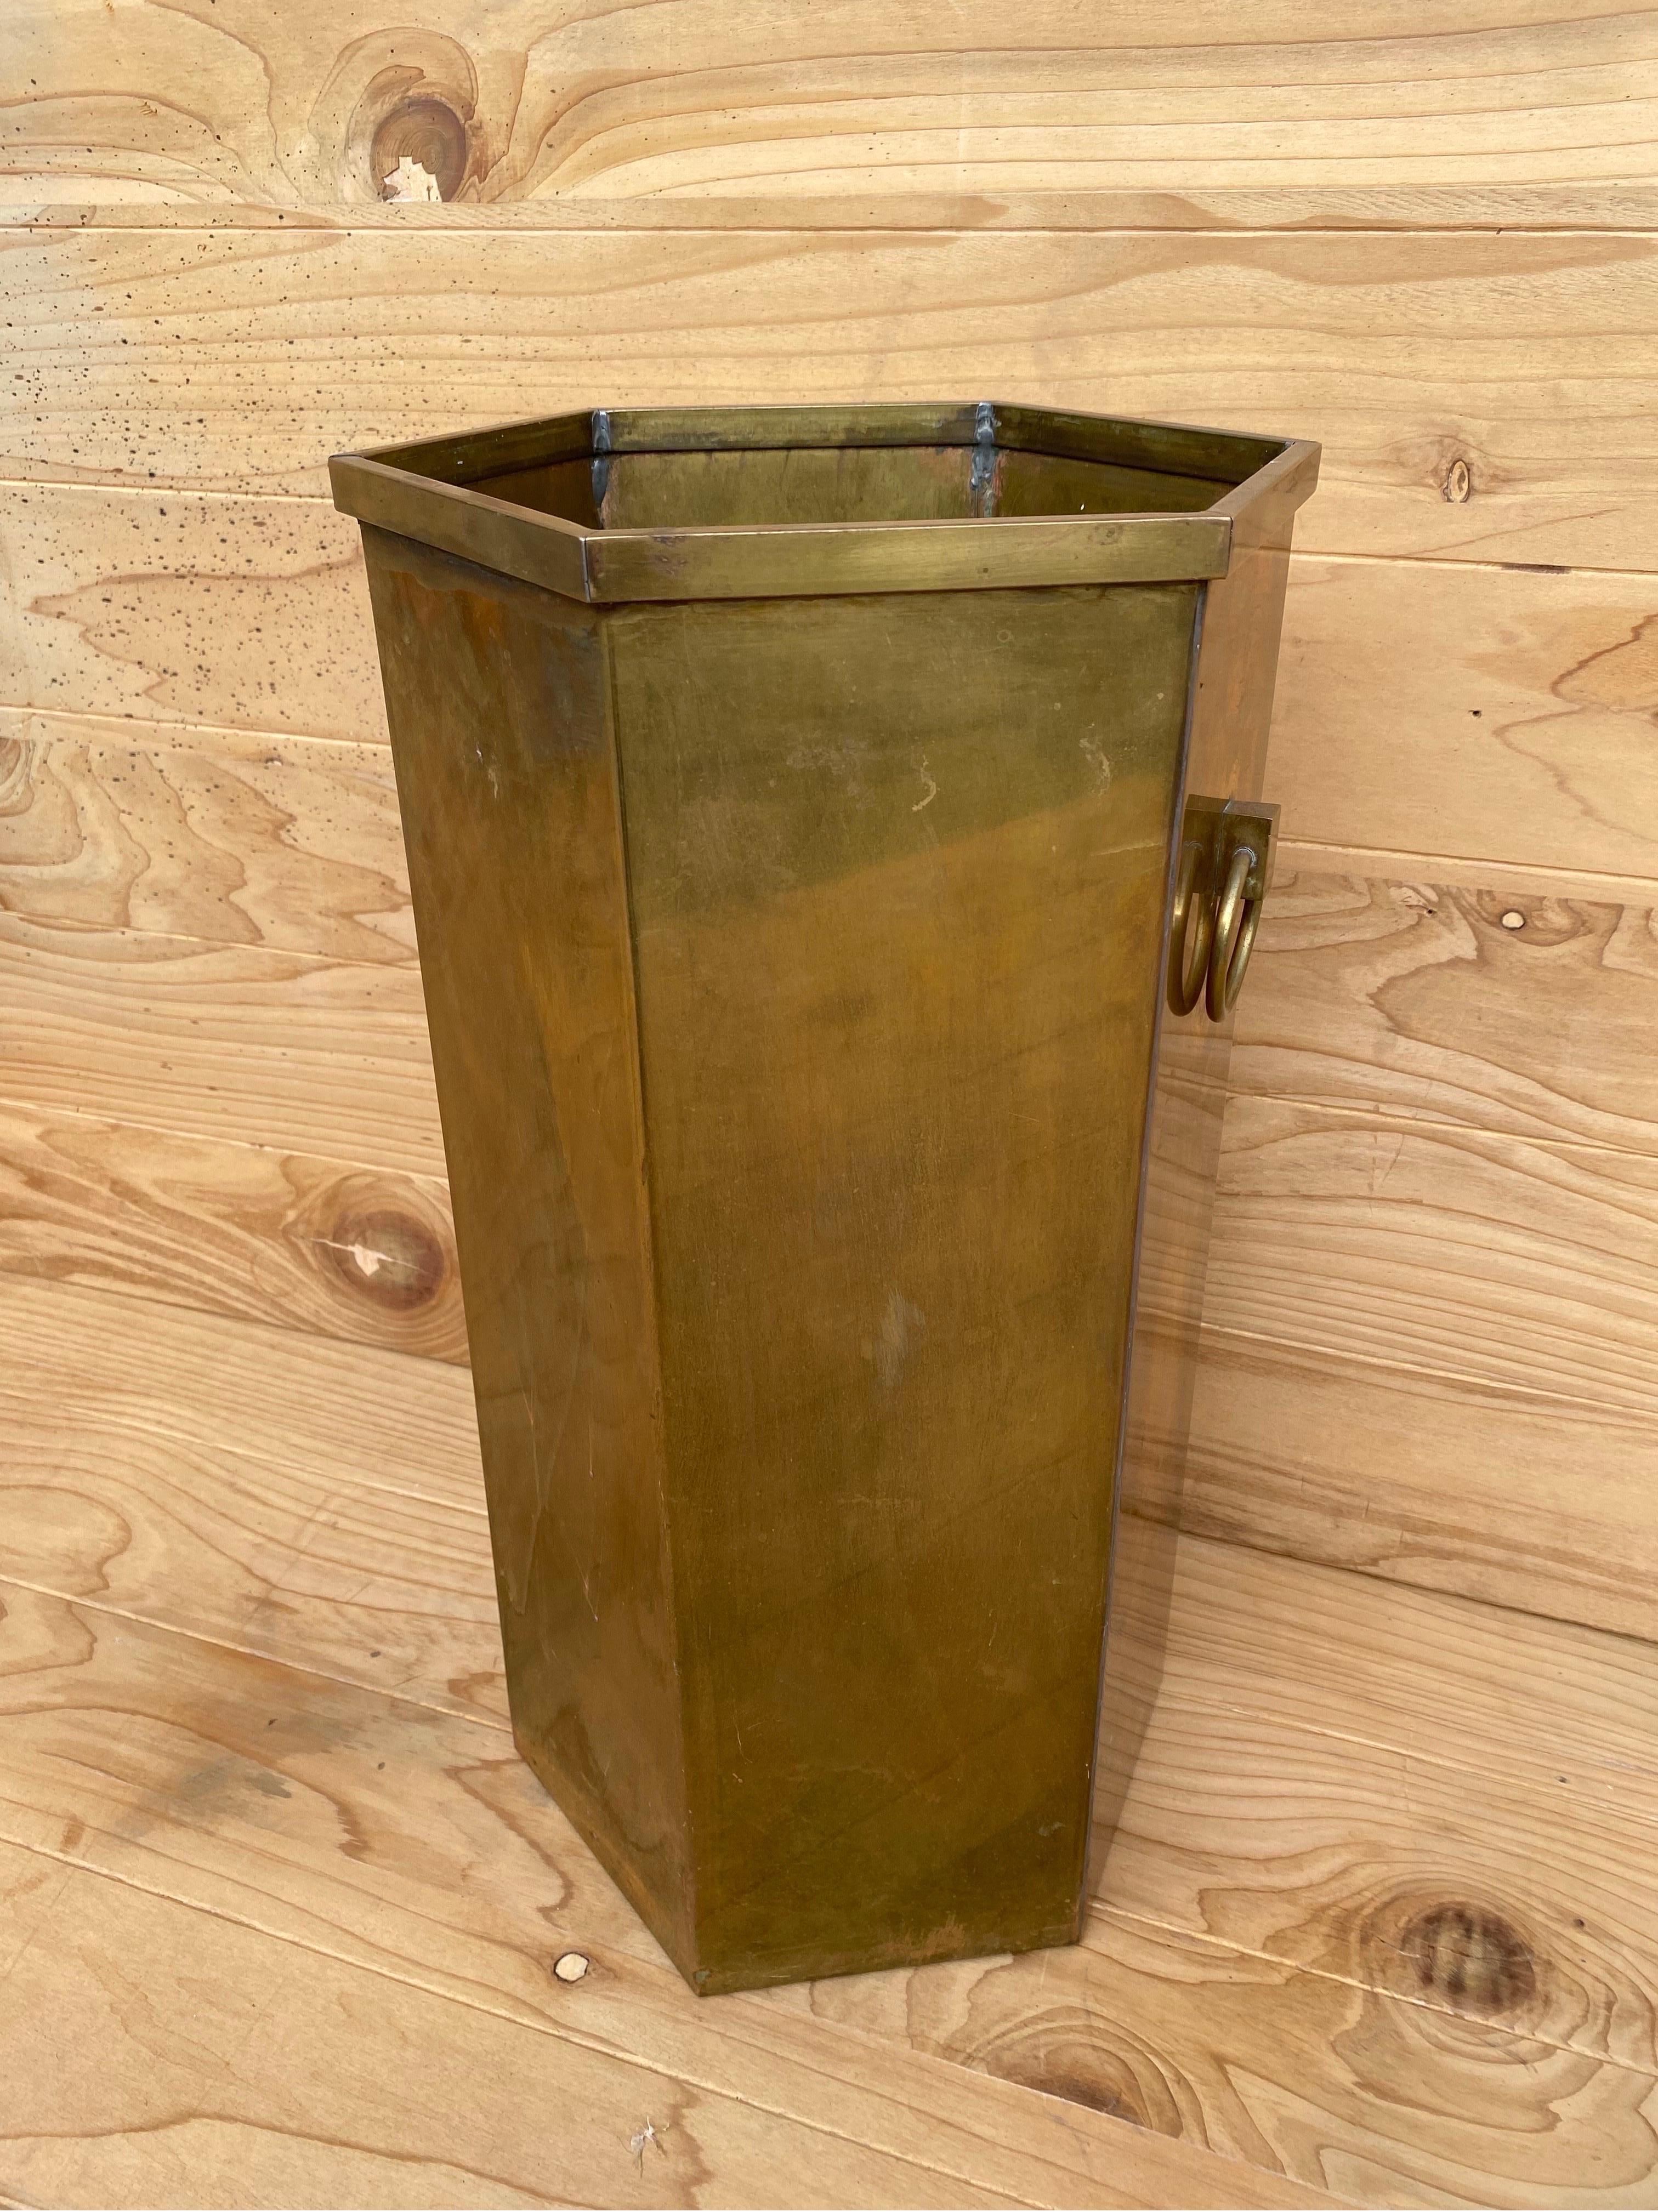 Antique Bronze Umbrella Stand
This antique bronze bin can have multiple uses in your home or office. From umbrella stand to wastepaper bin this antique will elevate your space with bronze warmth. 

Circa Early 20th Century

Dimensions:

W 9”
D